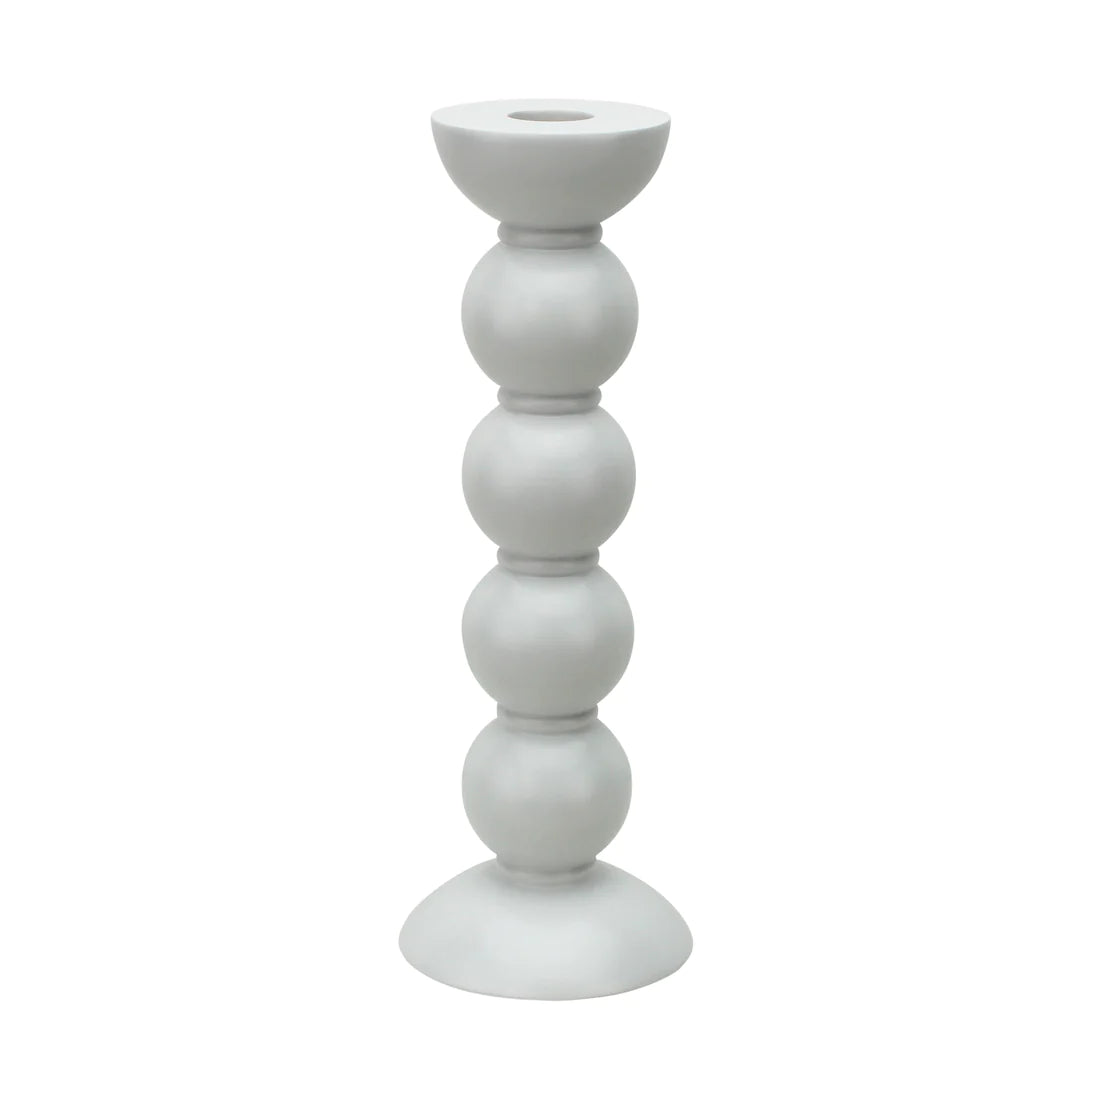 Tall White Bobbin Candlestick by Addison Ross